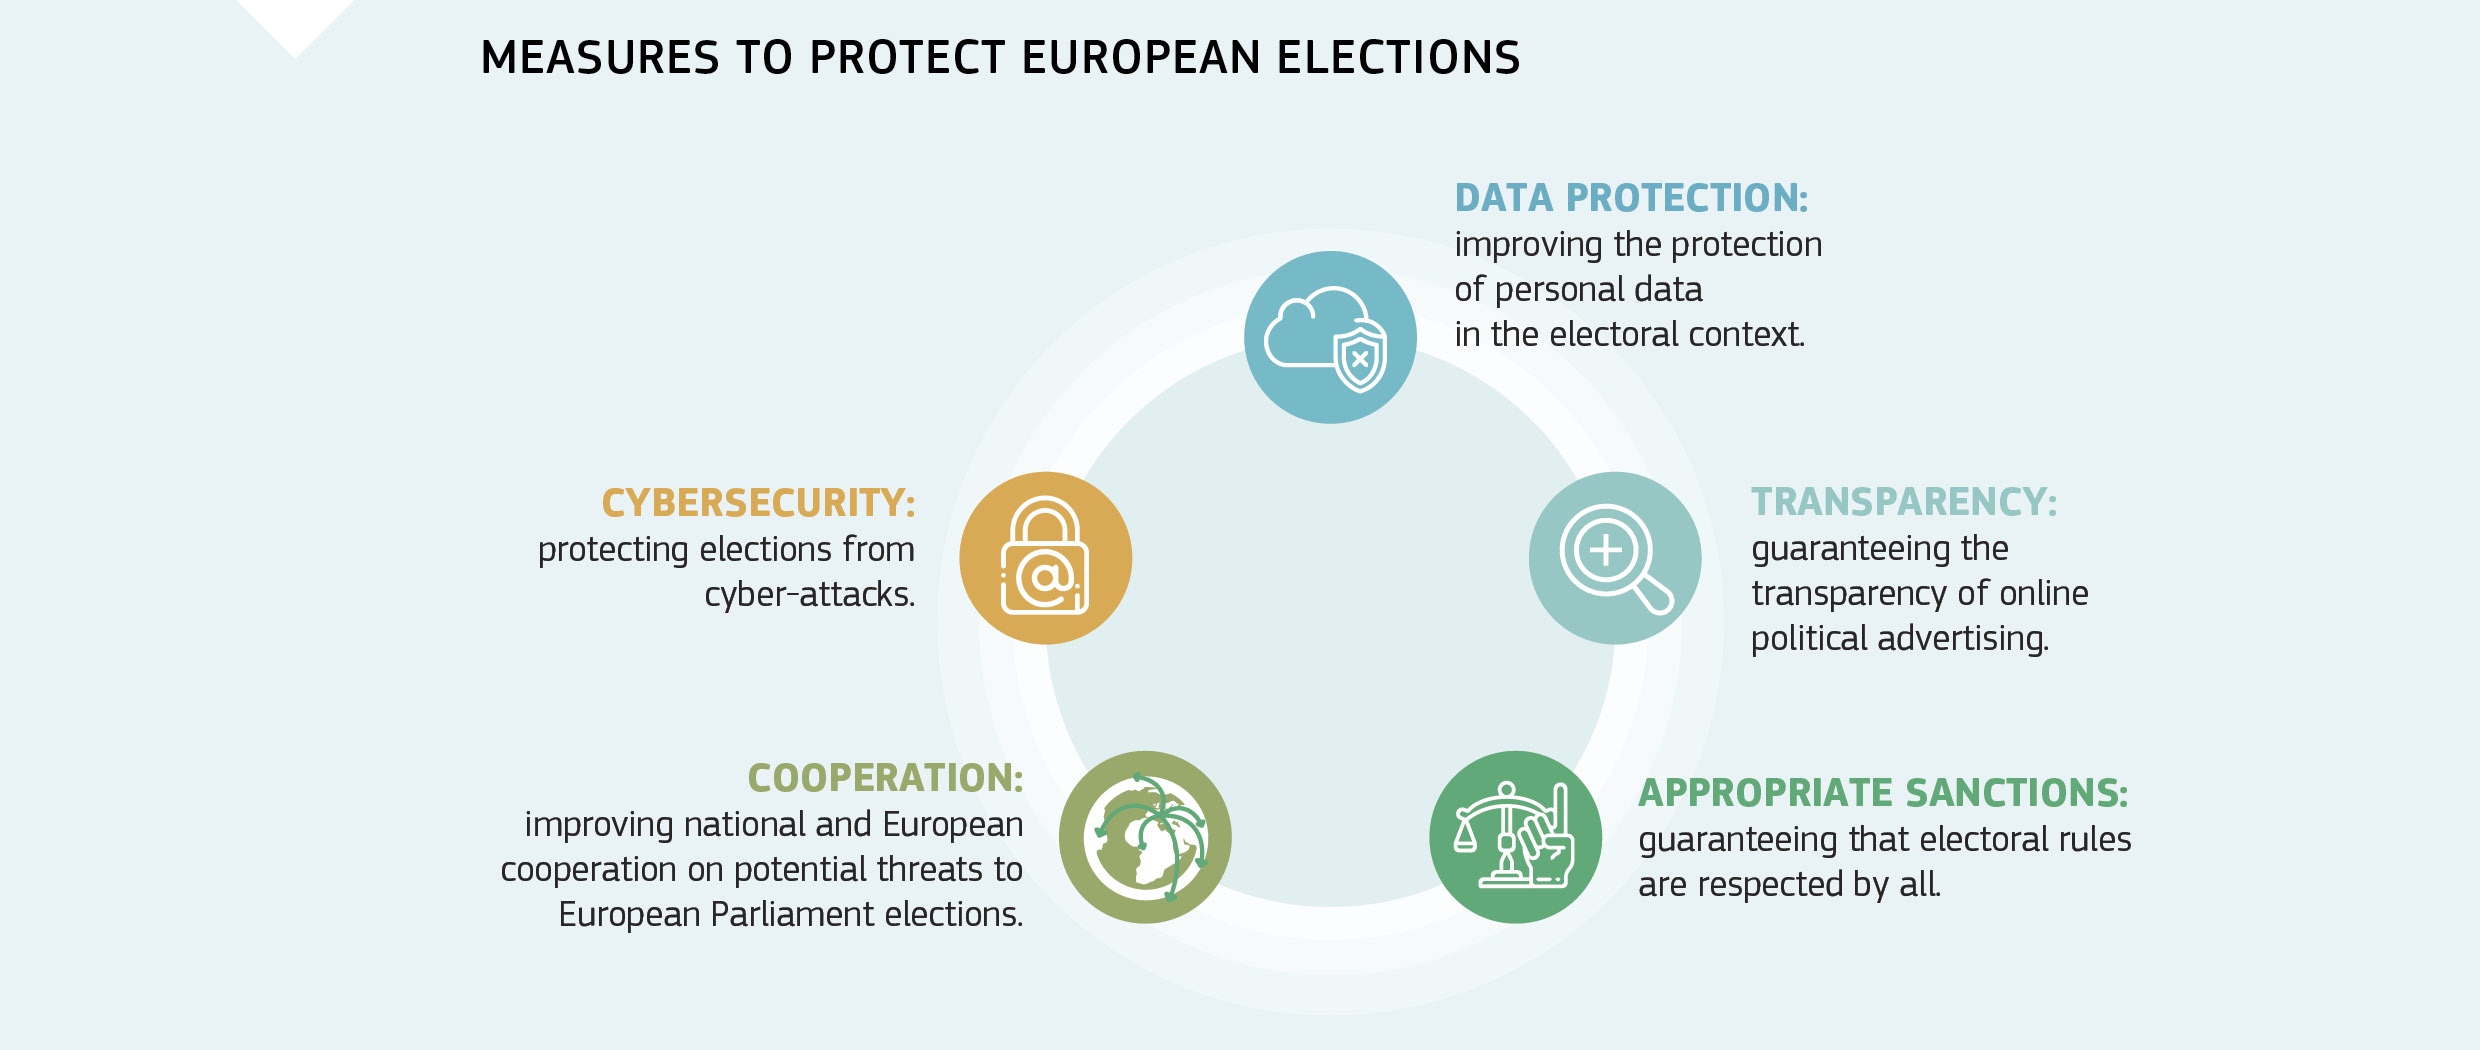 MEASURES TO PROTECT EUROPEAN ELECTIONS